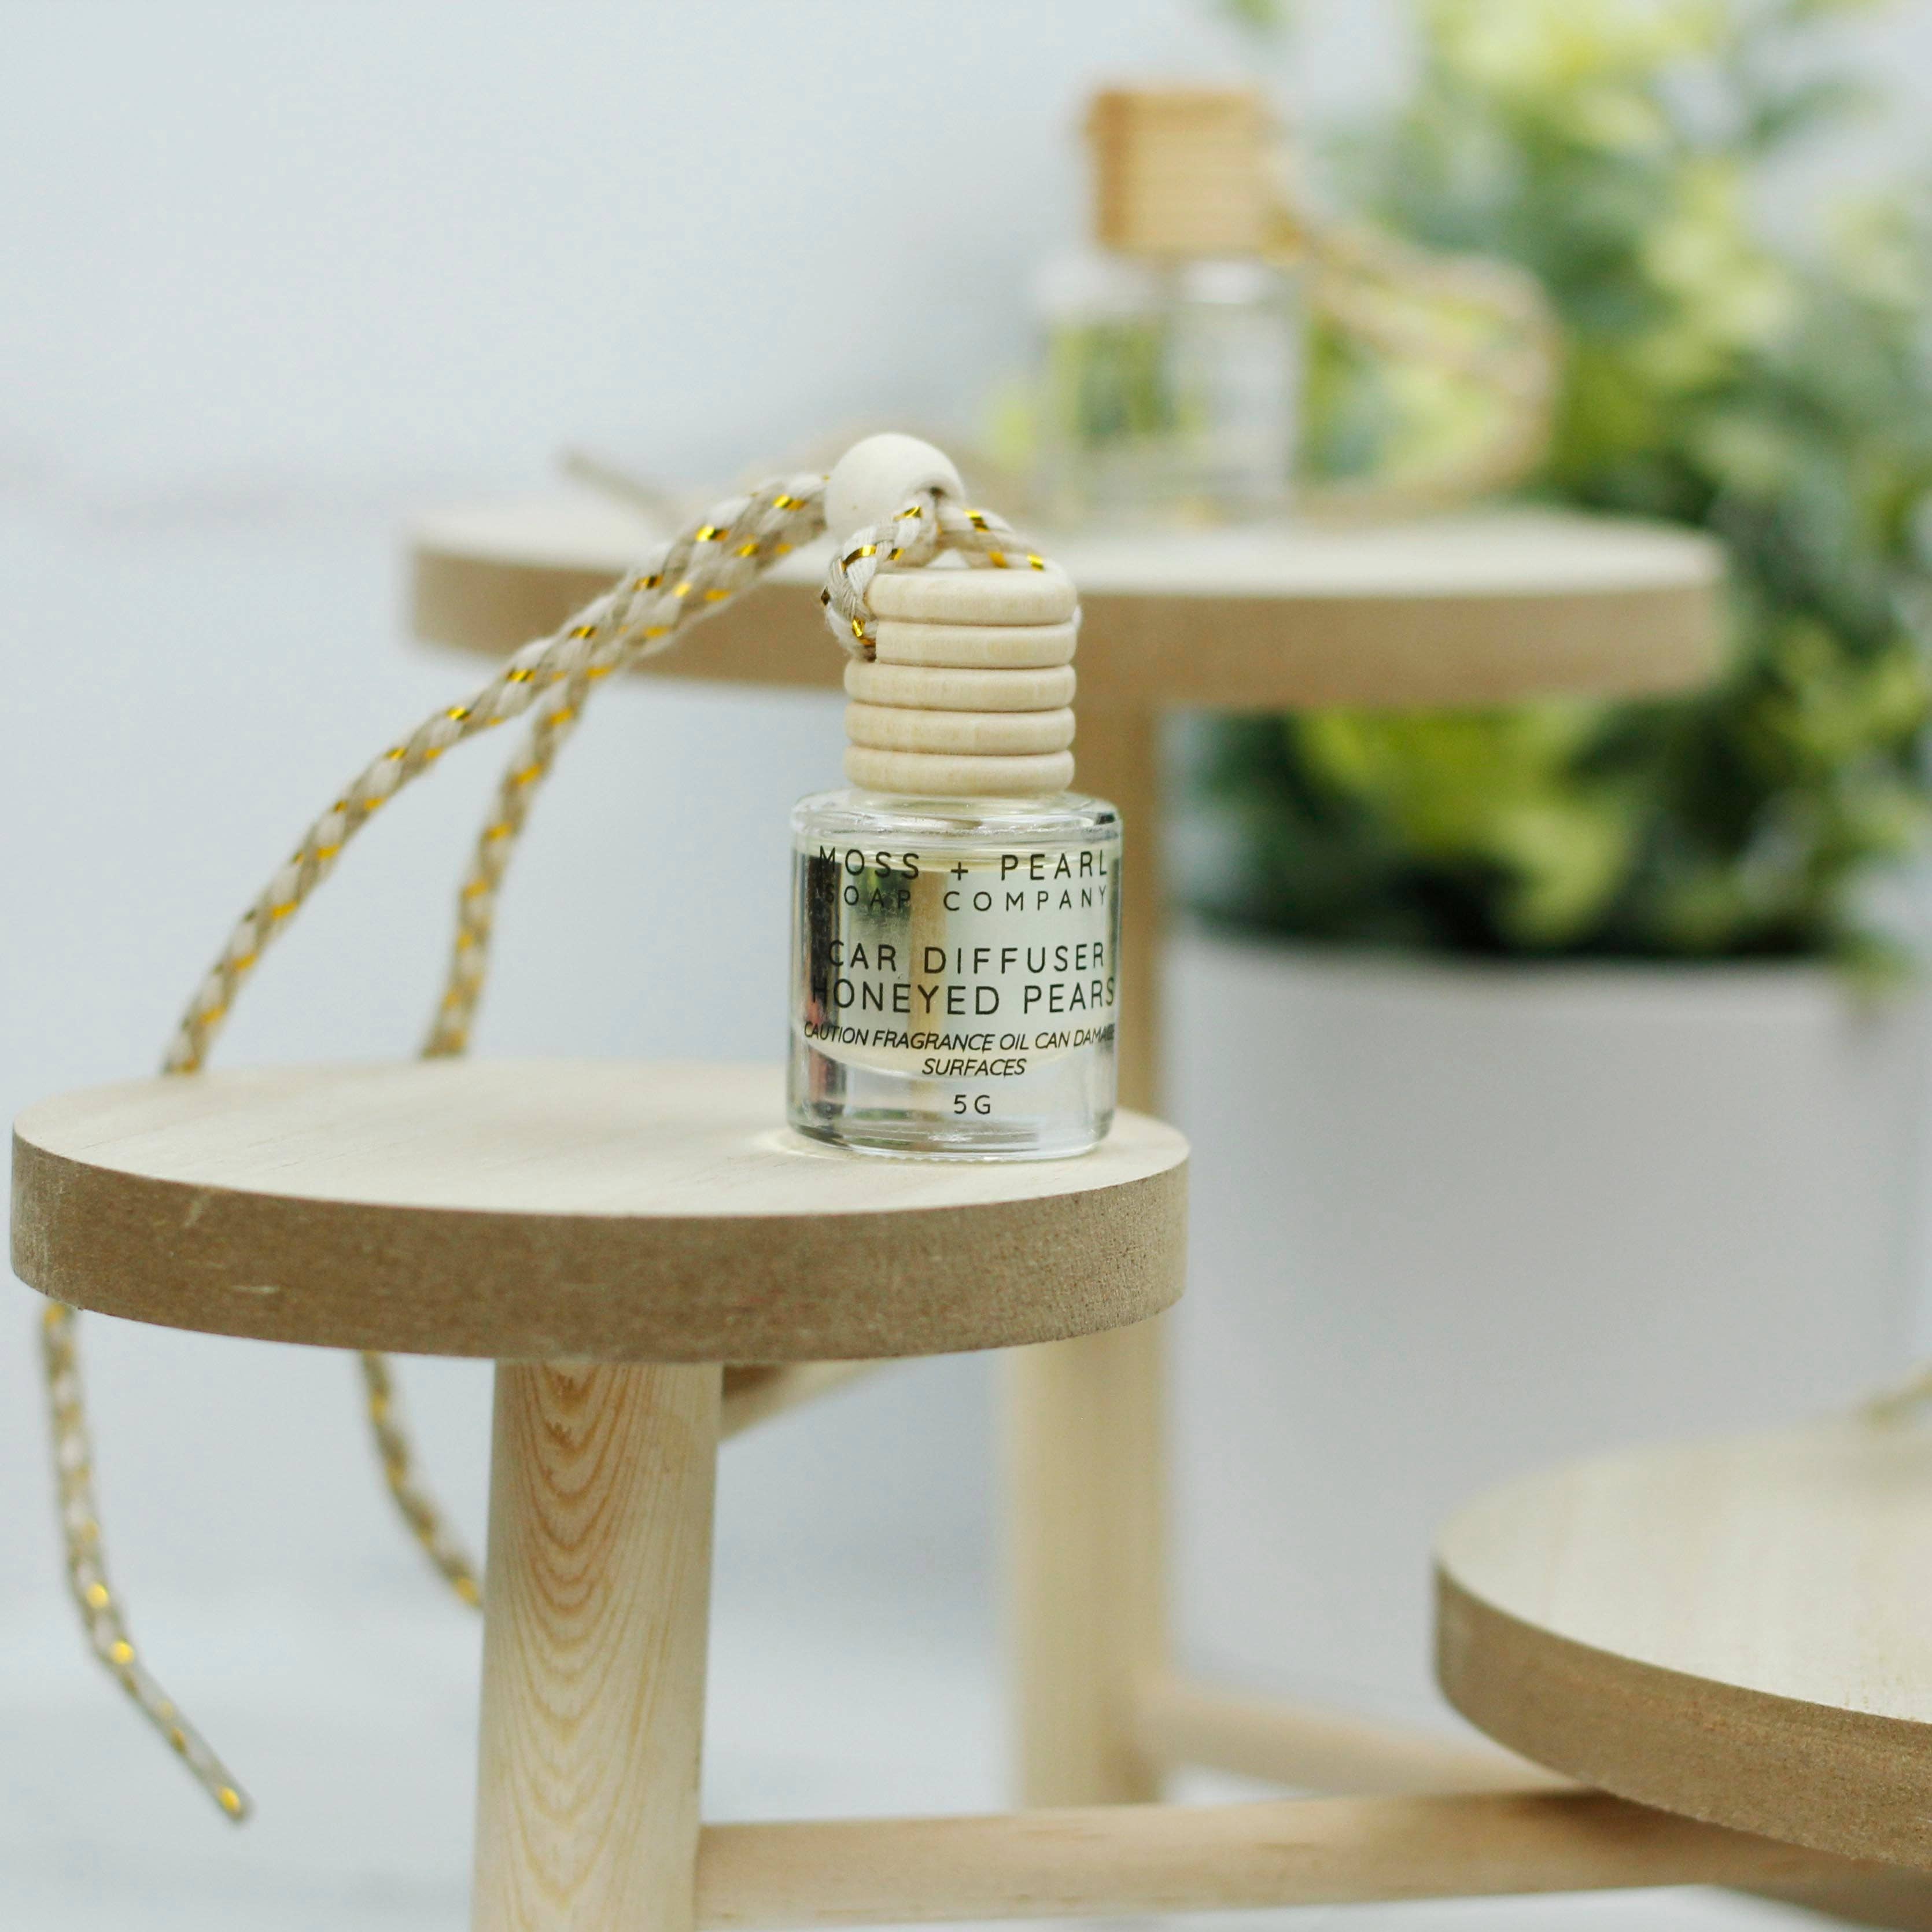 Moss + Pearl Soap Company - Eco-Friendly Car Scent Diffusers: Bamboo + Teakwood